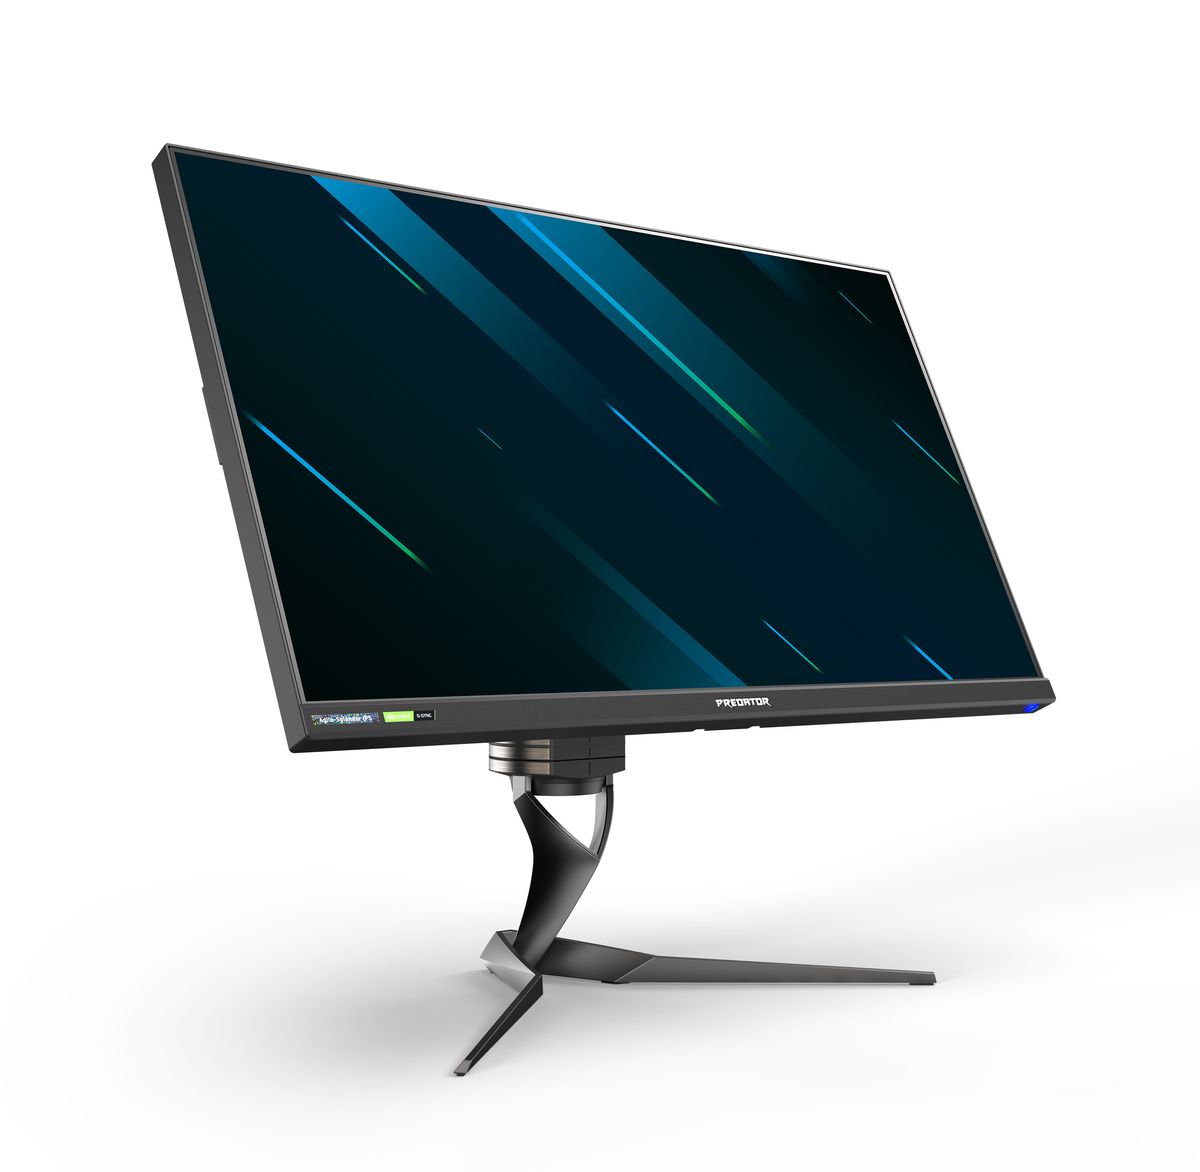 Acer's five new gaming monitors could be perfect buys for PC gamers